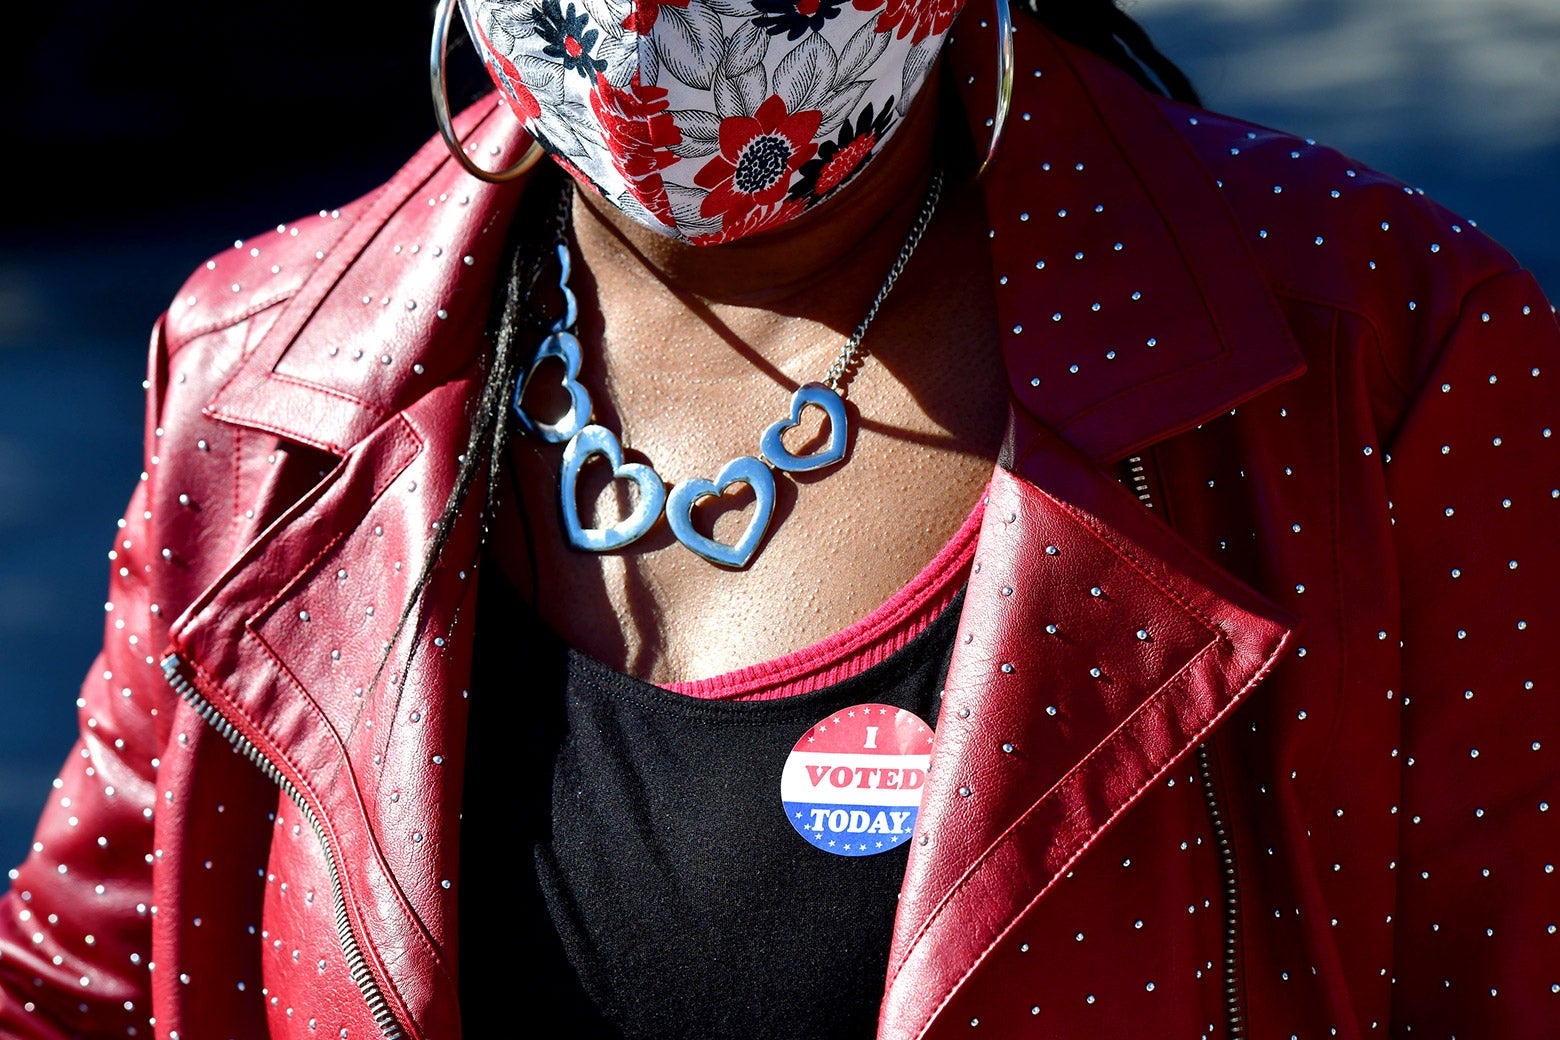 A Black woman in a red leather jacket with an I voted sticker and a mask on.